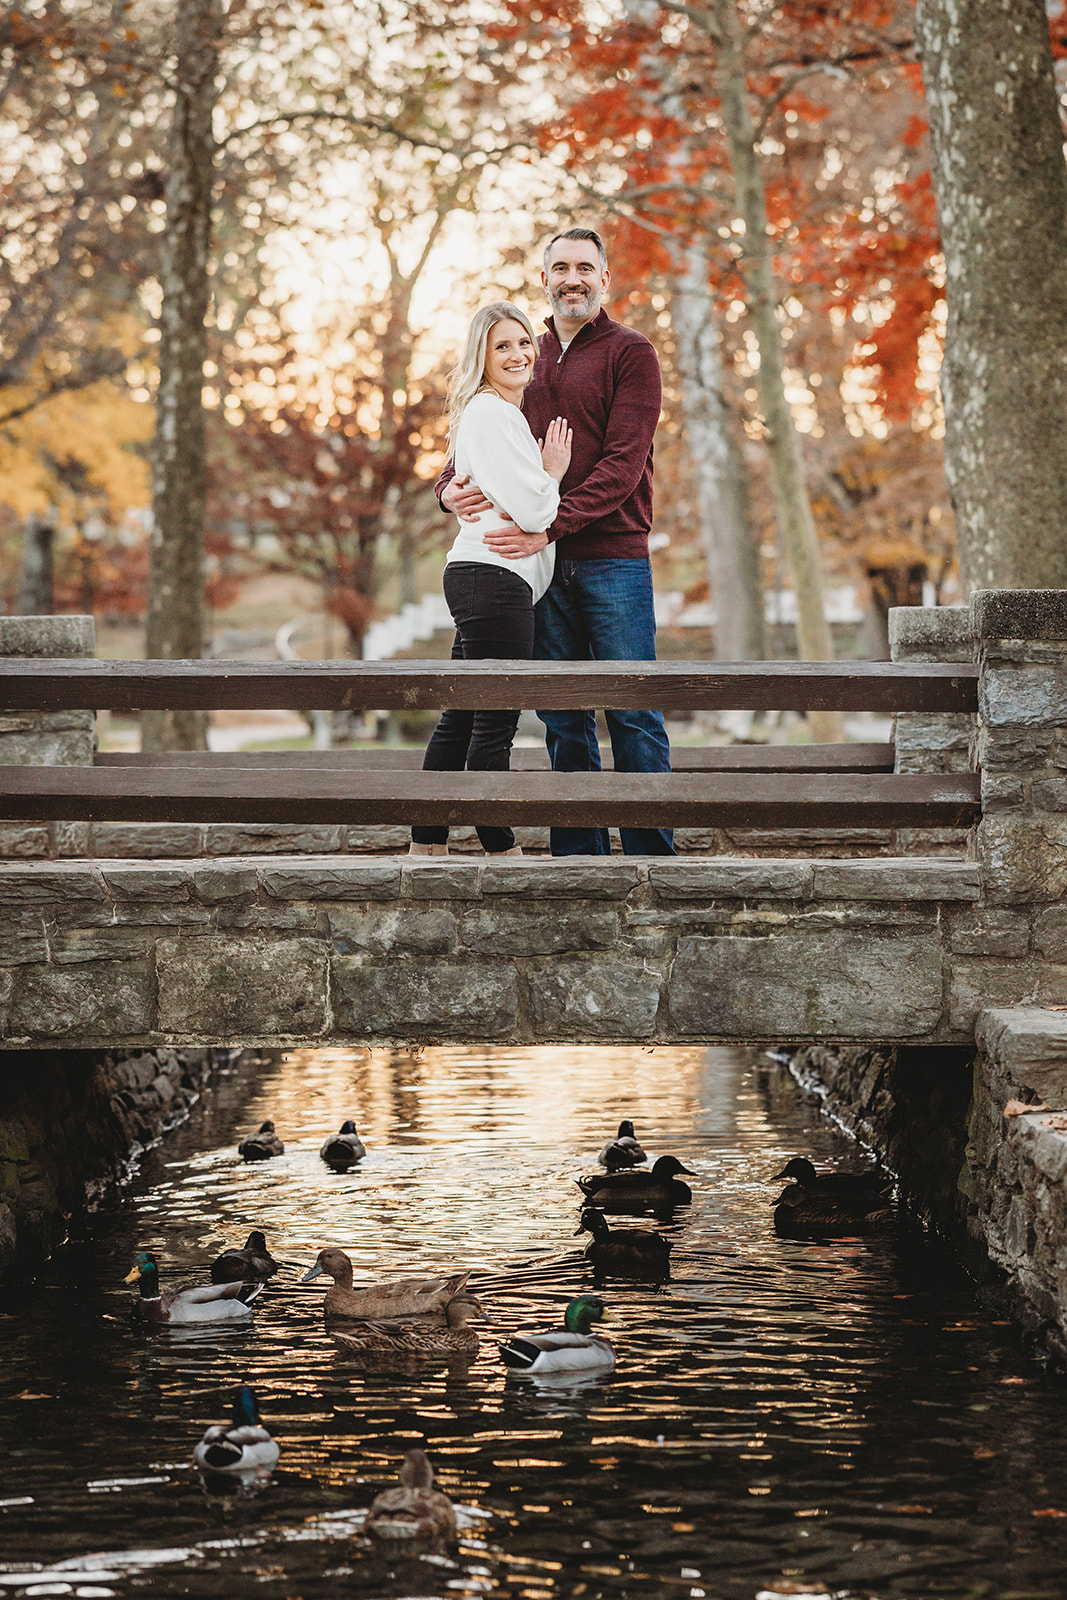 outdoor fall engagement session at Lititz Springs Park in central Pennsylvania Wilbur Buds railroad tracks ducks